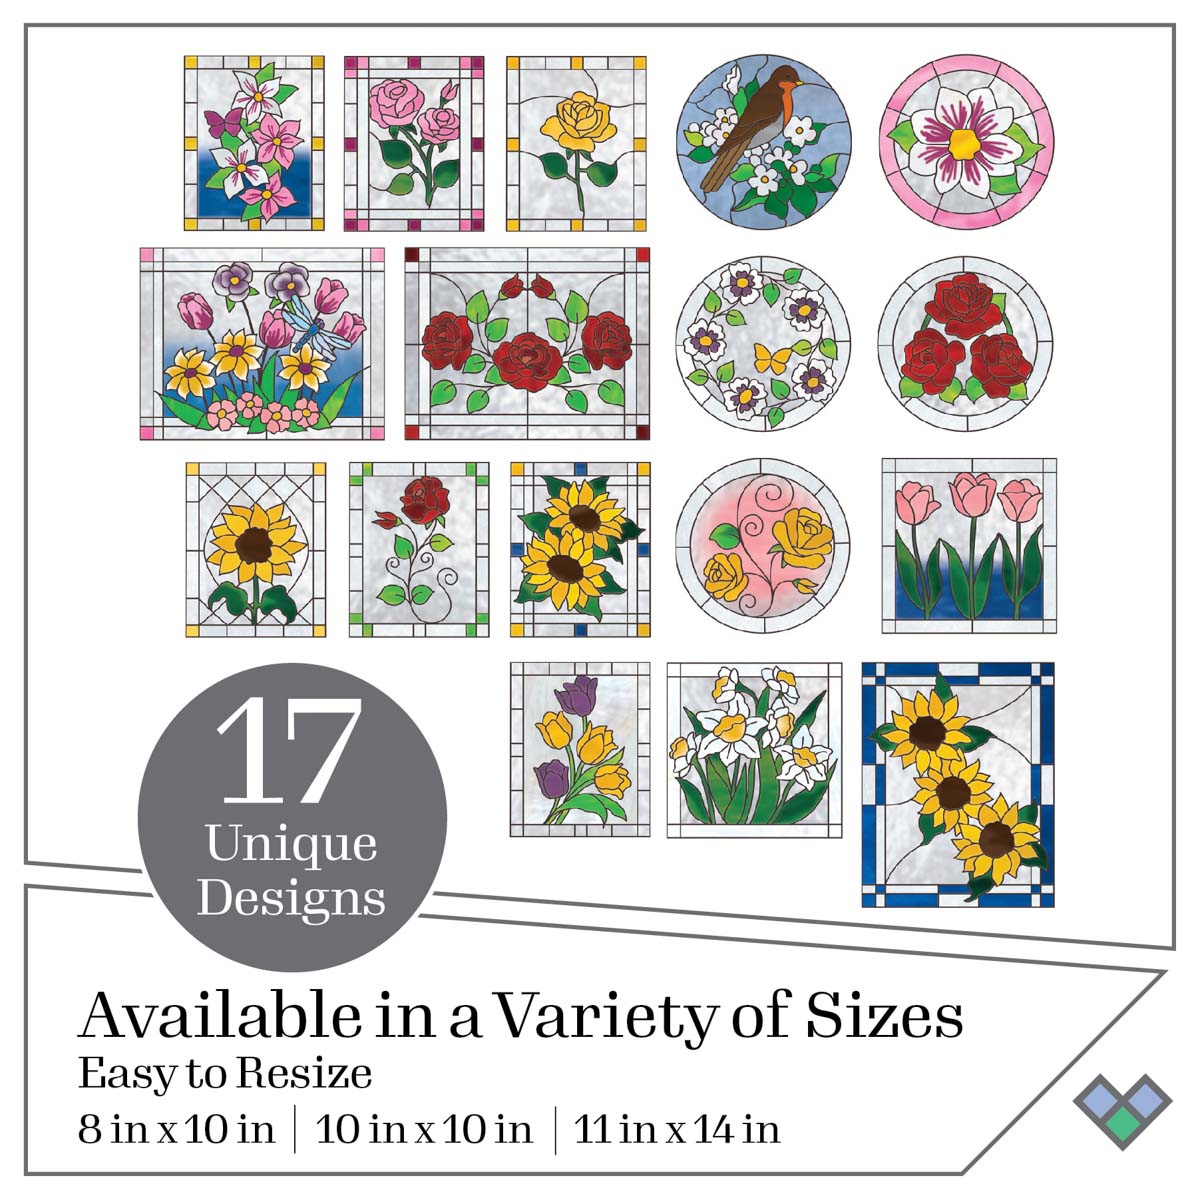 Gallery Glass ® Pattern Packs - Floral - 19736